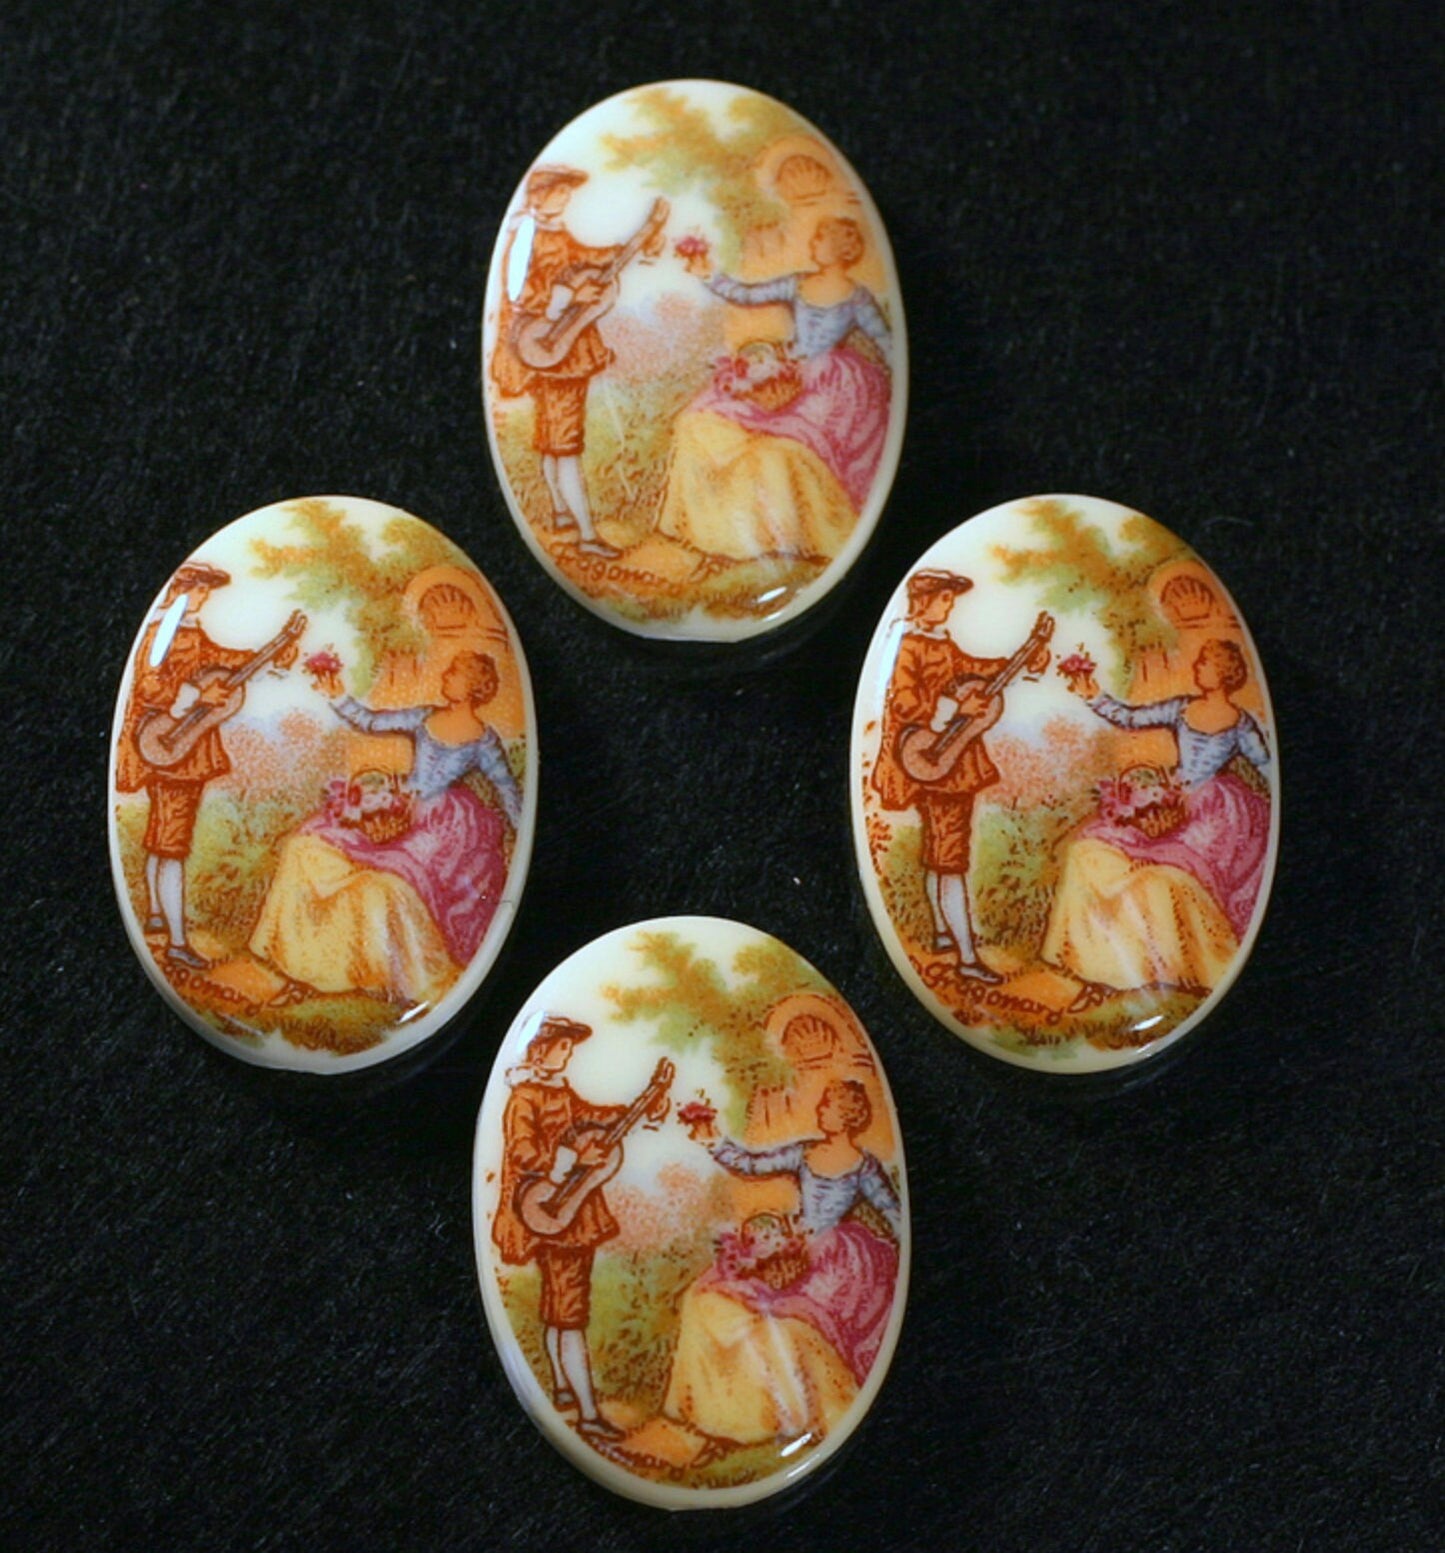 German Plastic Porcelain Decal Painting - Rococo (Scene 2) Oval 25x18MM ON CHALKWHITE BASE